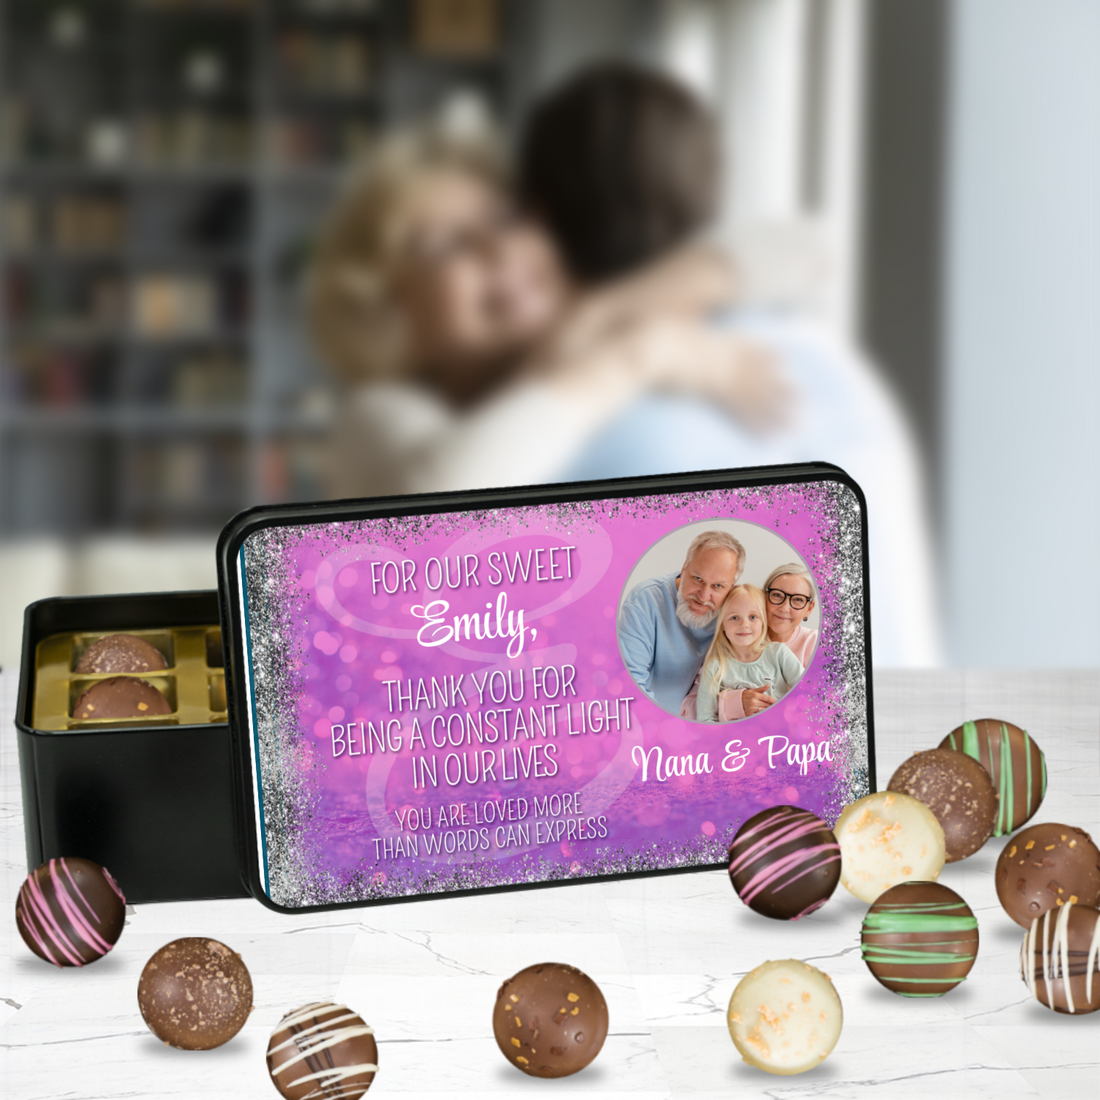 Personalized Thank You Chocolate Box - Handmade Chocolate Truffles - Gift for Granddaughter - Grandparents Gift - Customized Chocolate Gift